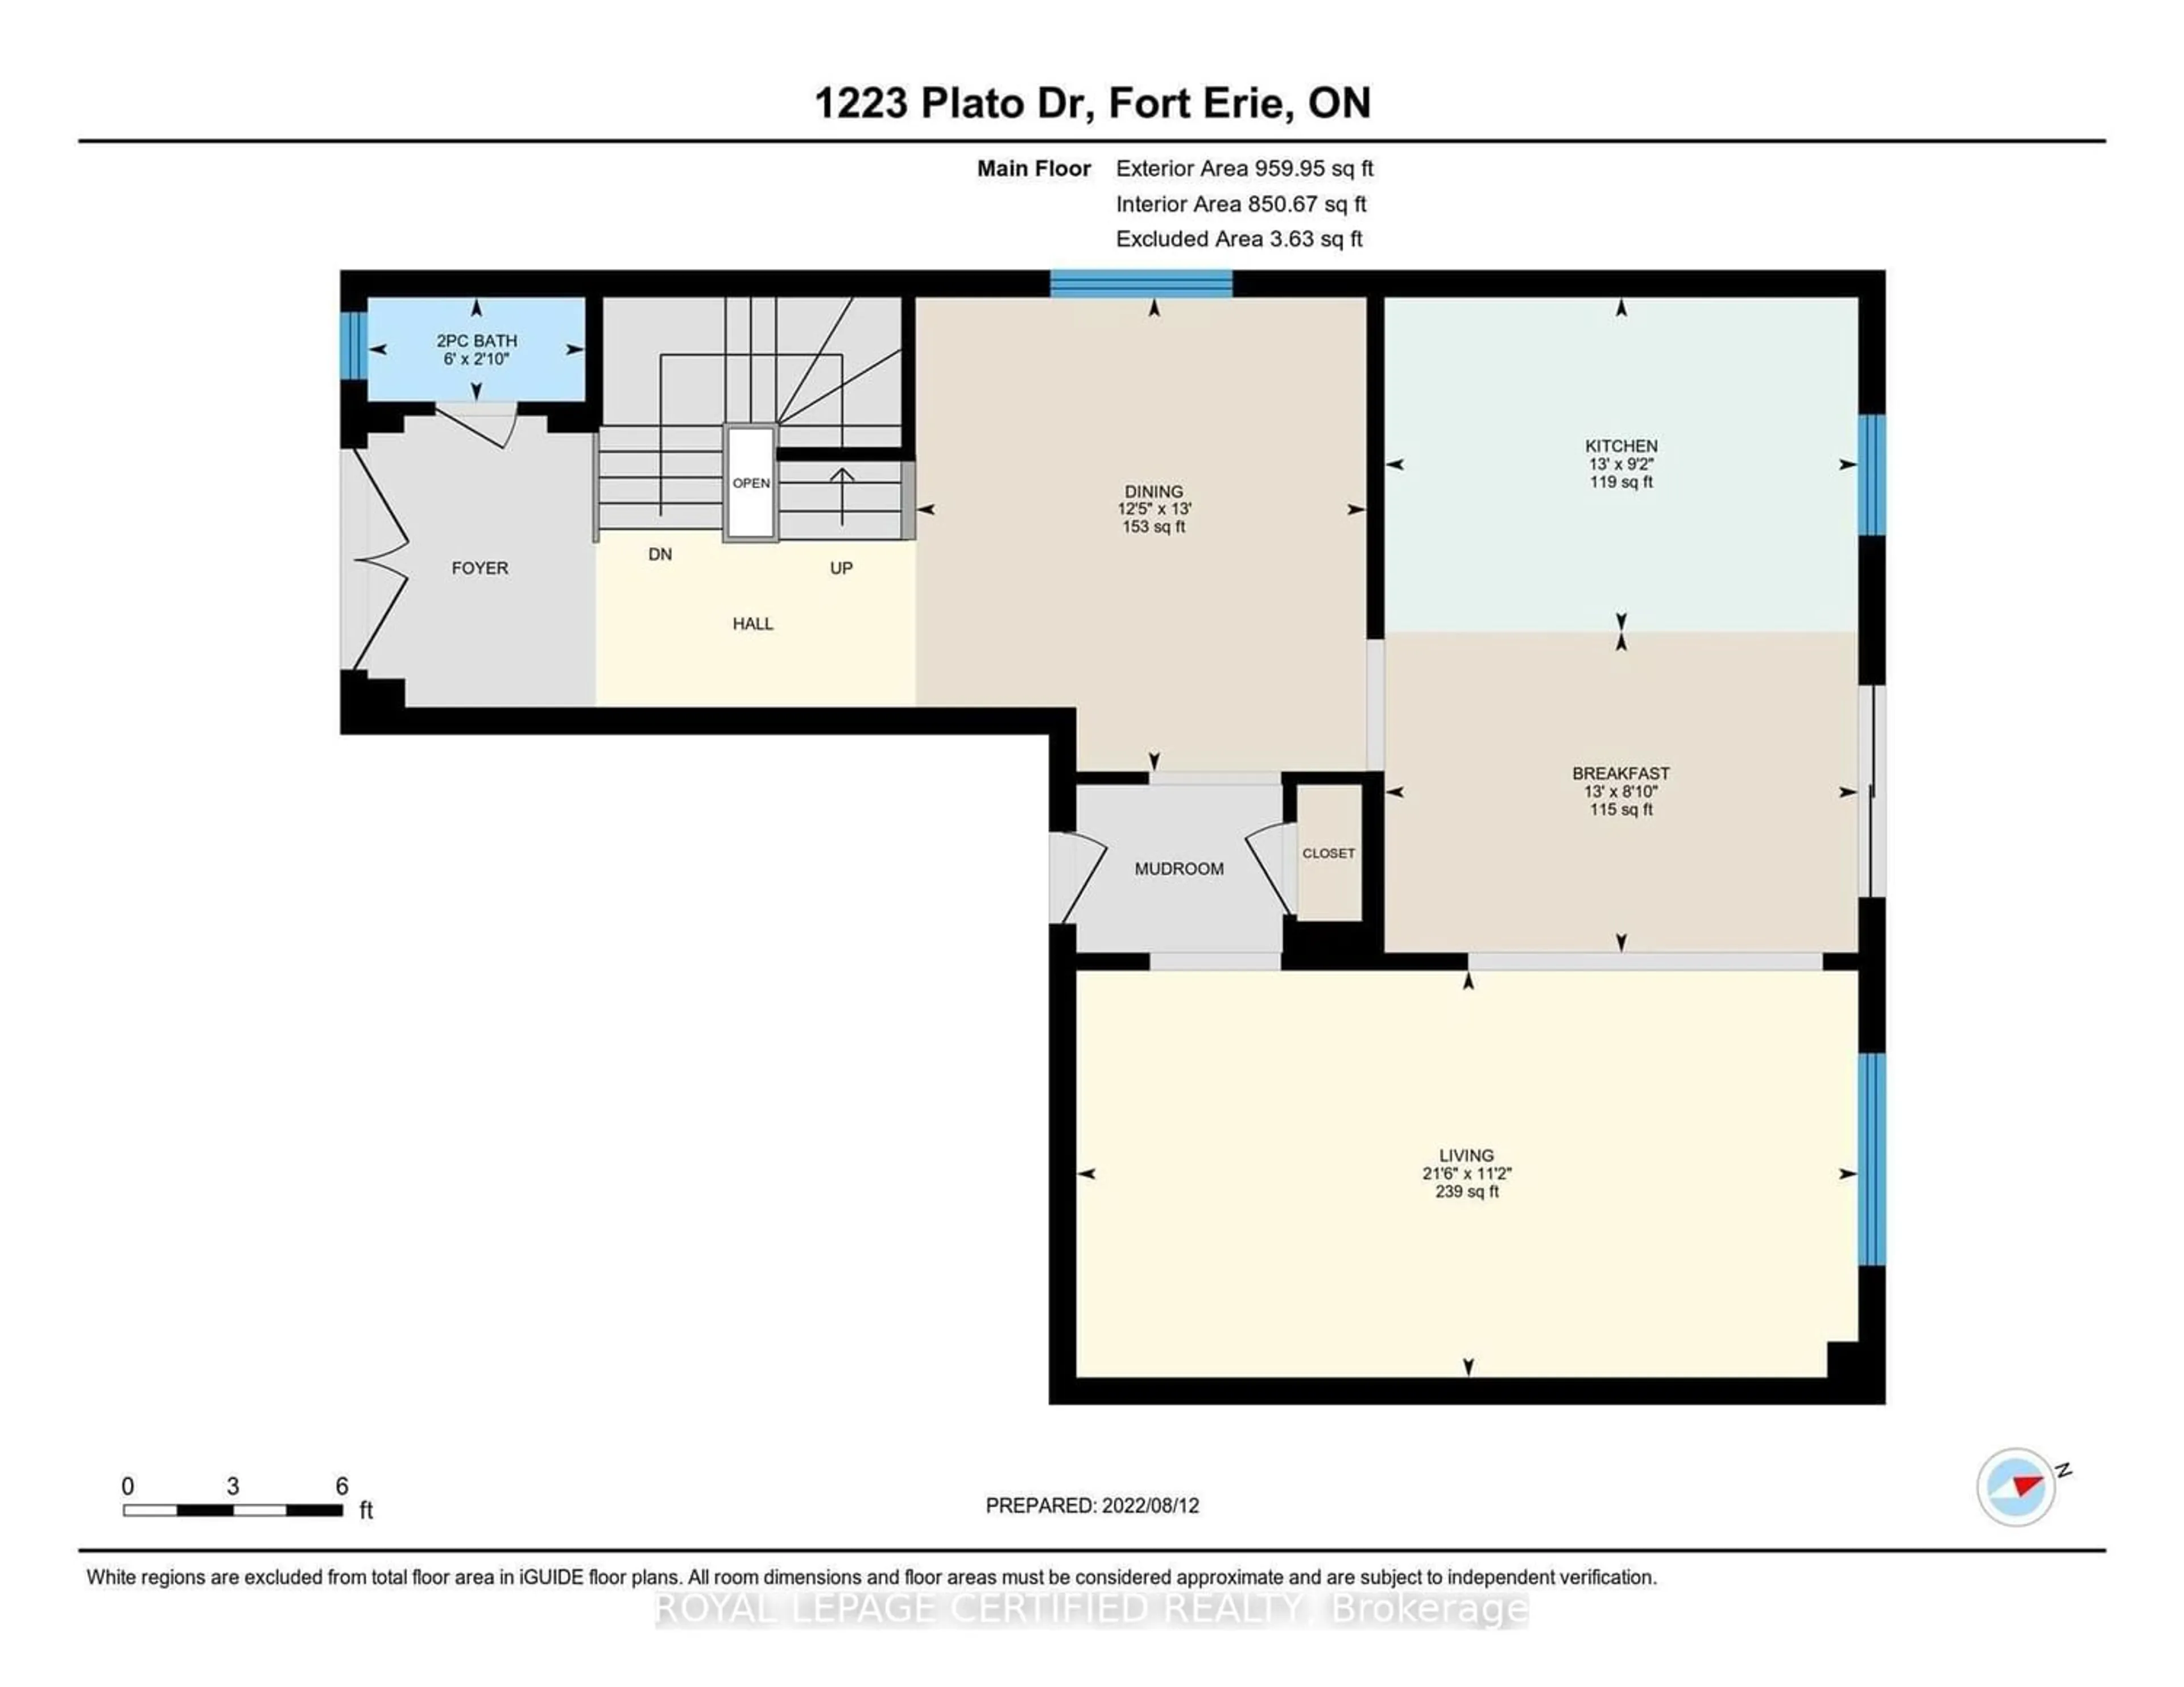 Floor plan for 1223 Plato Dr, Fort Erie Ontario L2A 0C7